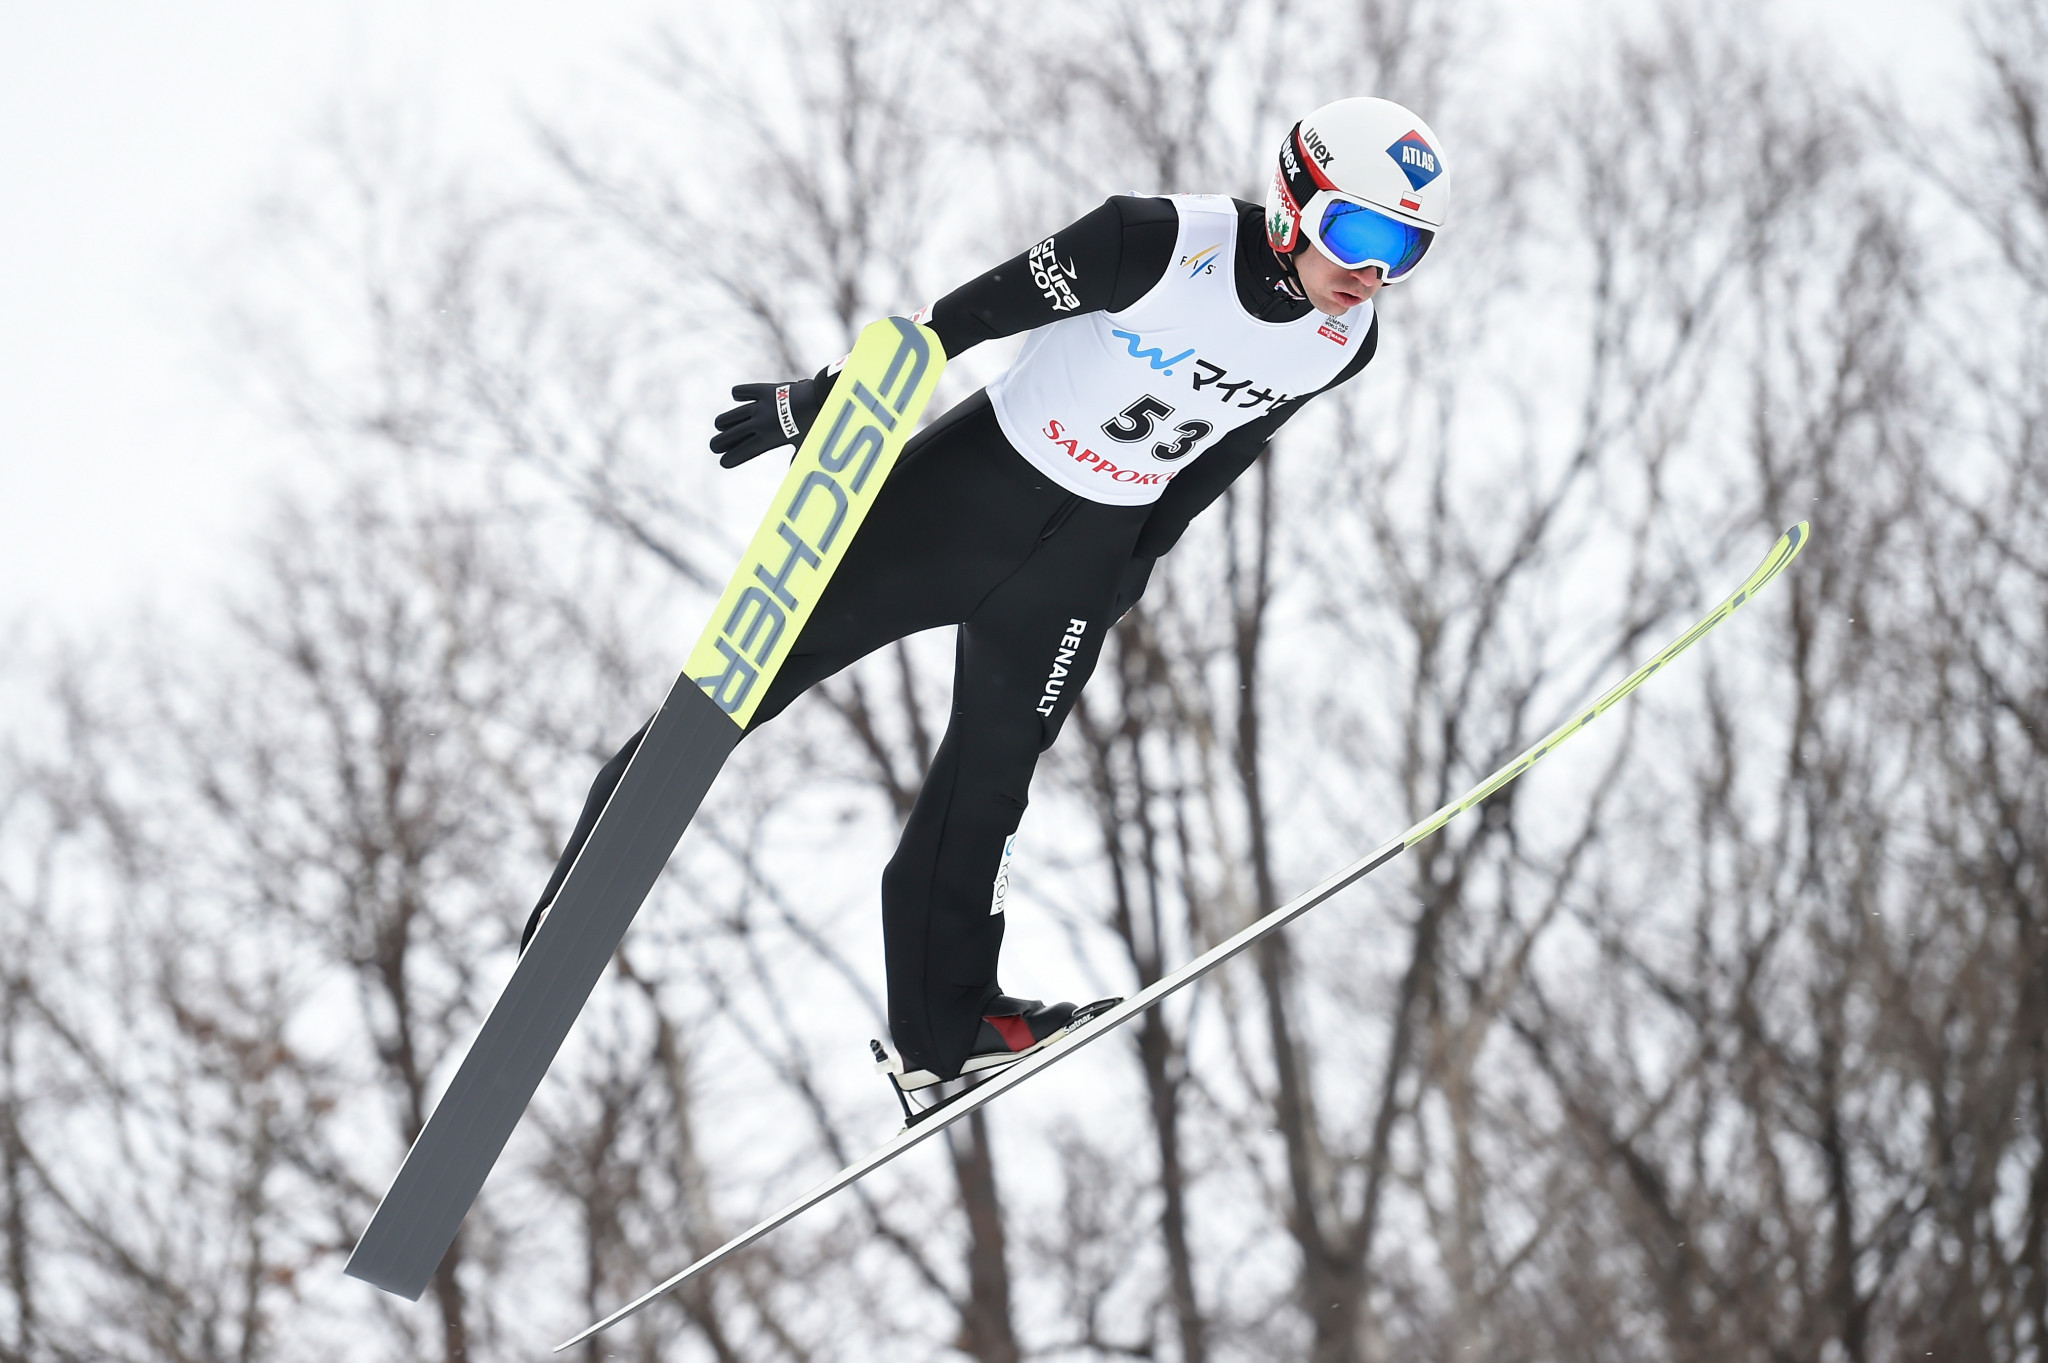 Kamil Stoch of Poland topped qualifying at the FIS Ski Jumping World Cup season-opener ©Getty Images